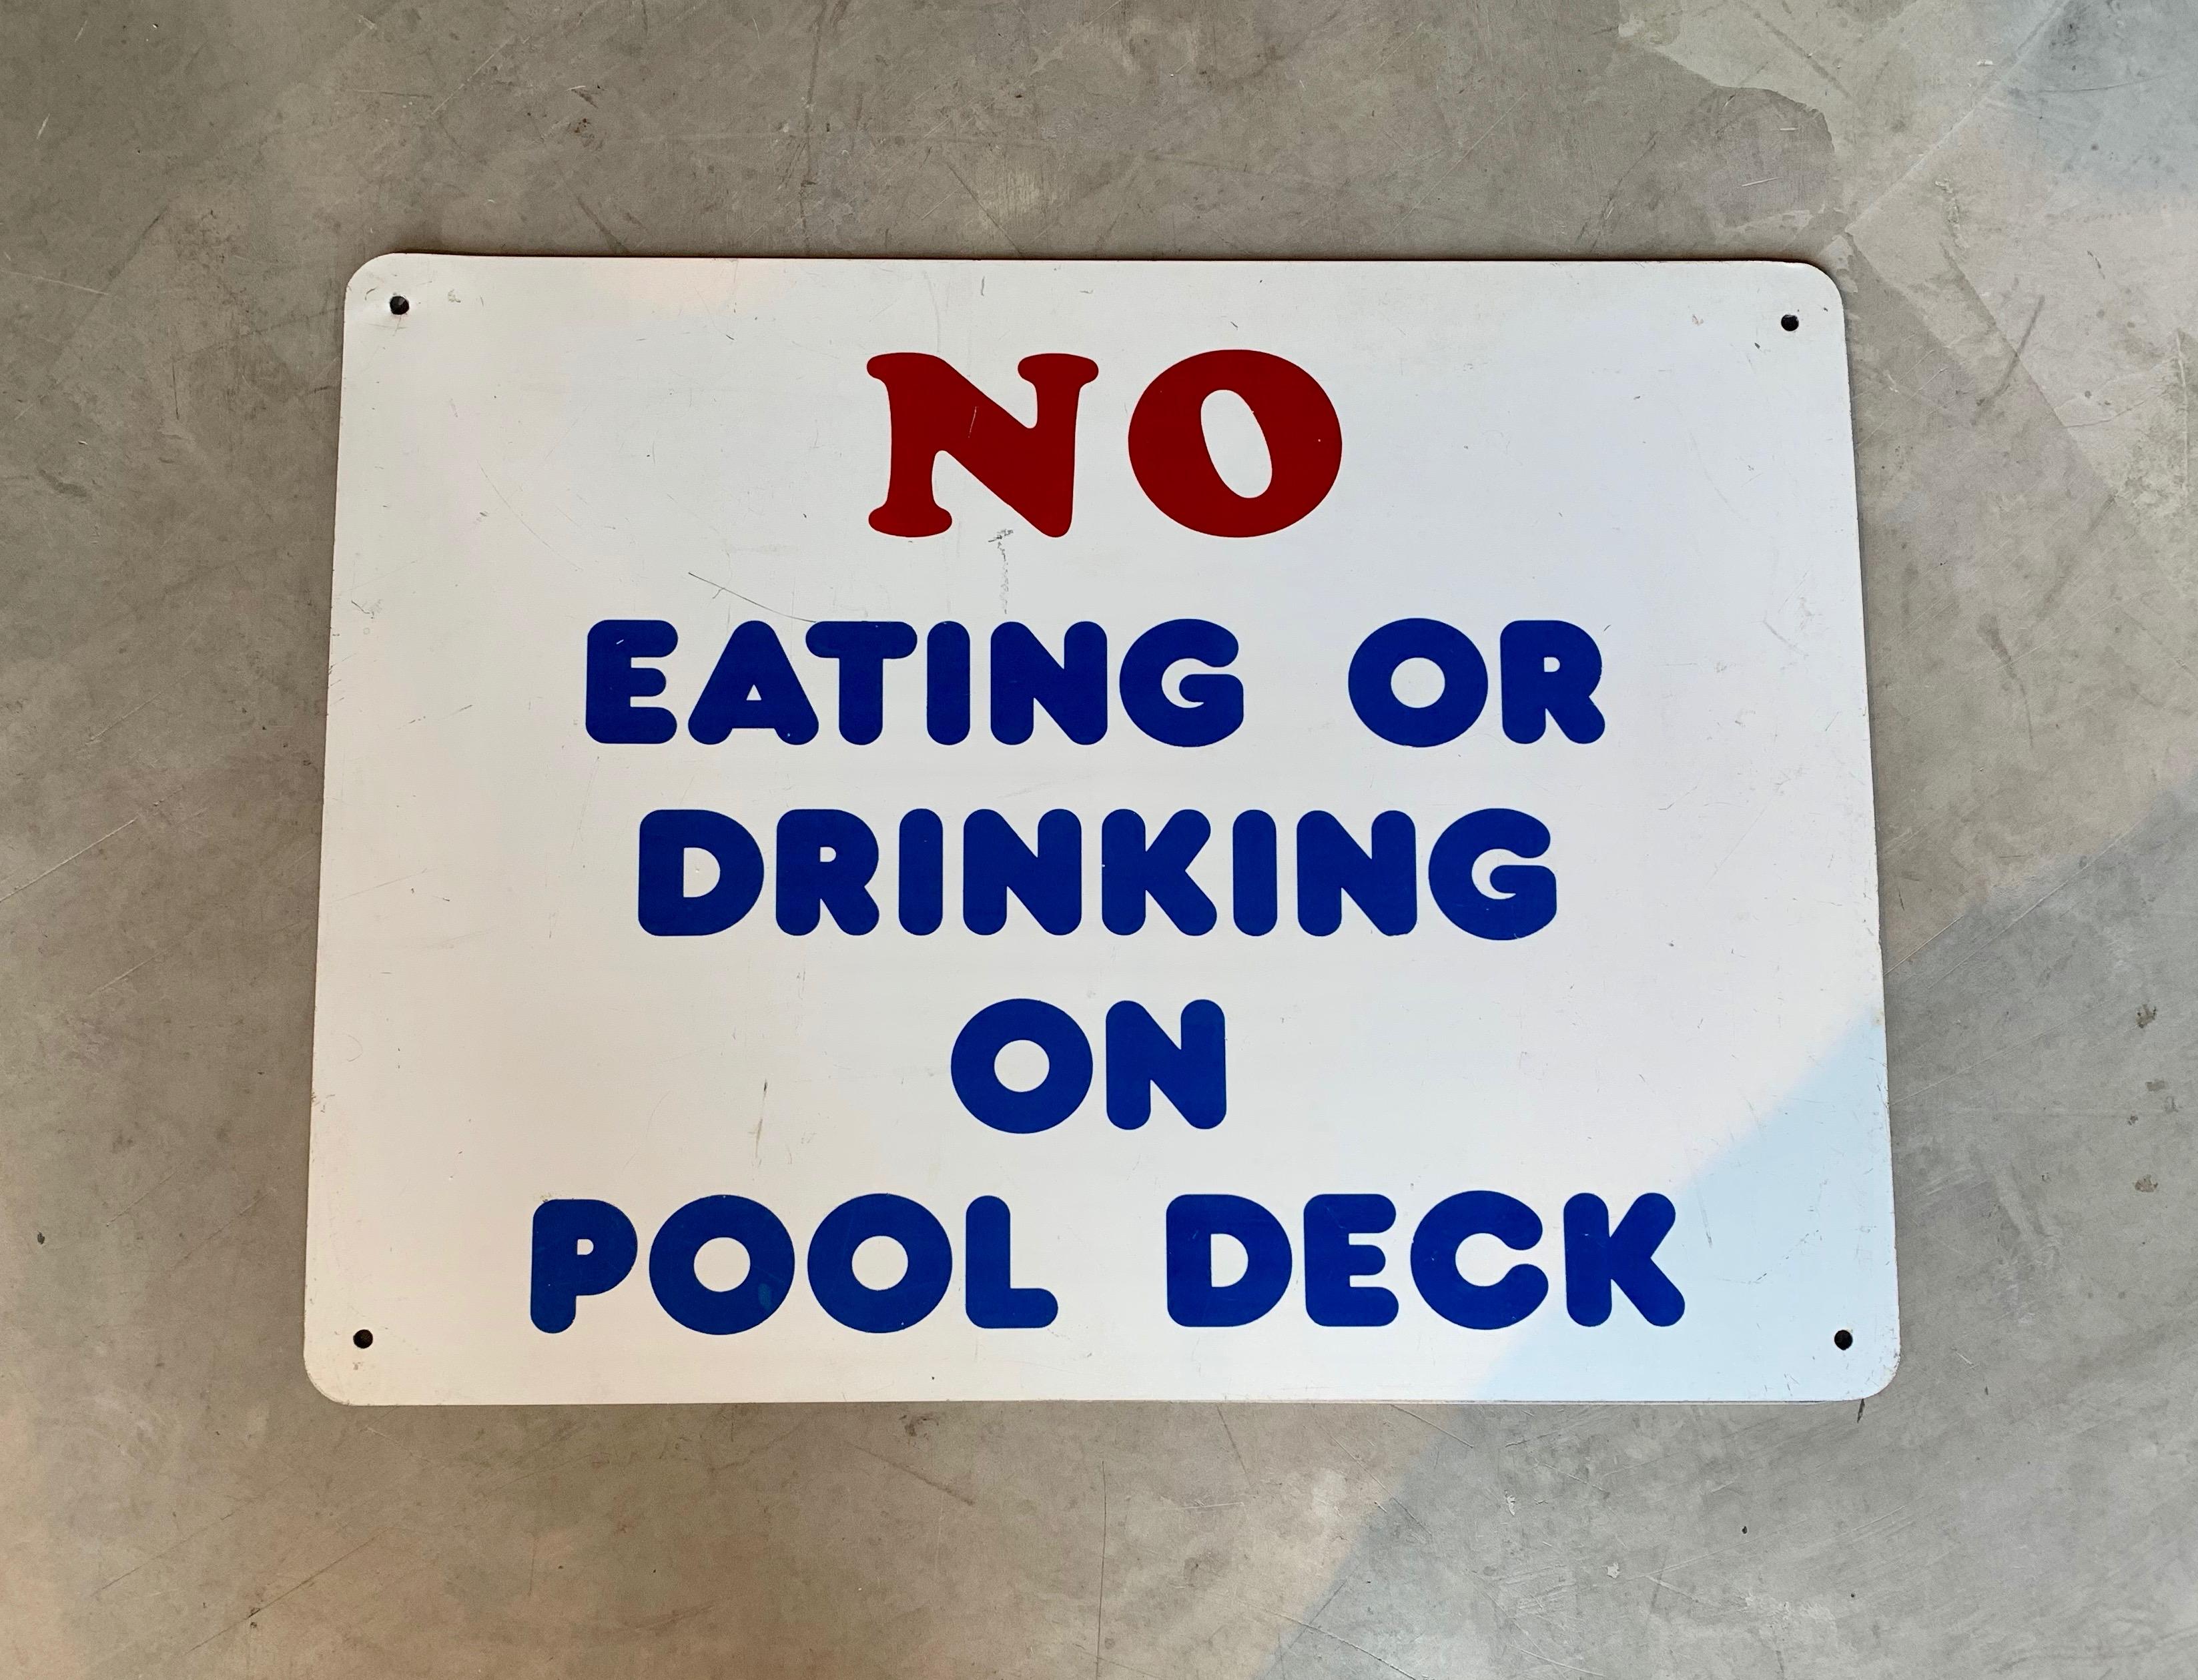 Vintage metal sign from a public pool. White sign with red and blue lettering. No eating or drinking on pool deck. Good condition with some scratches.